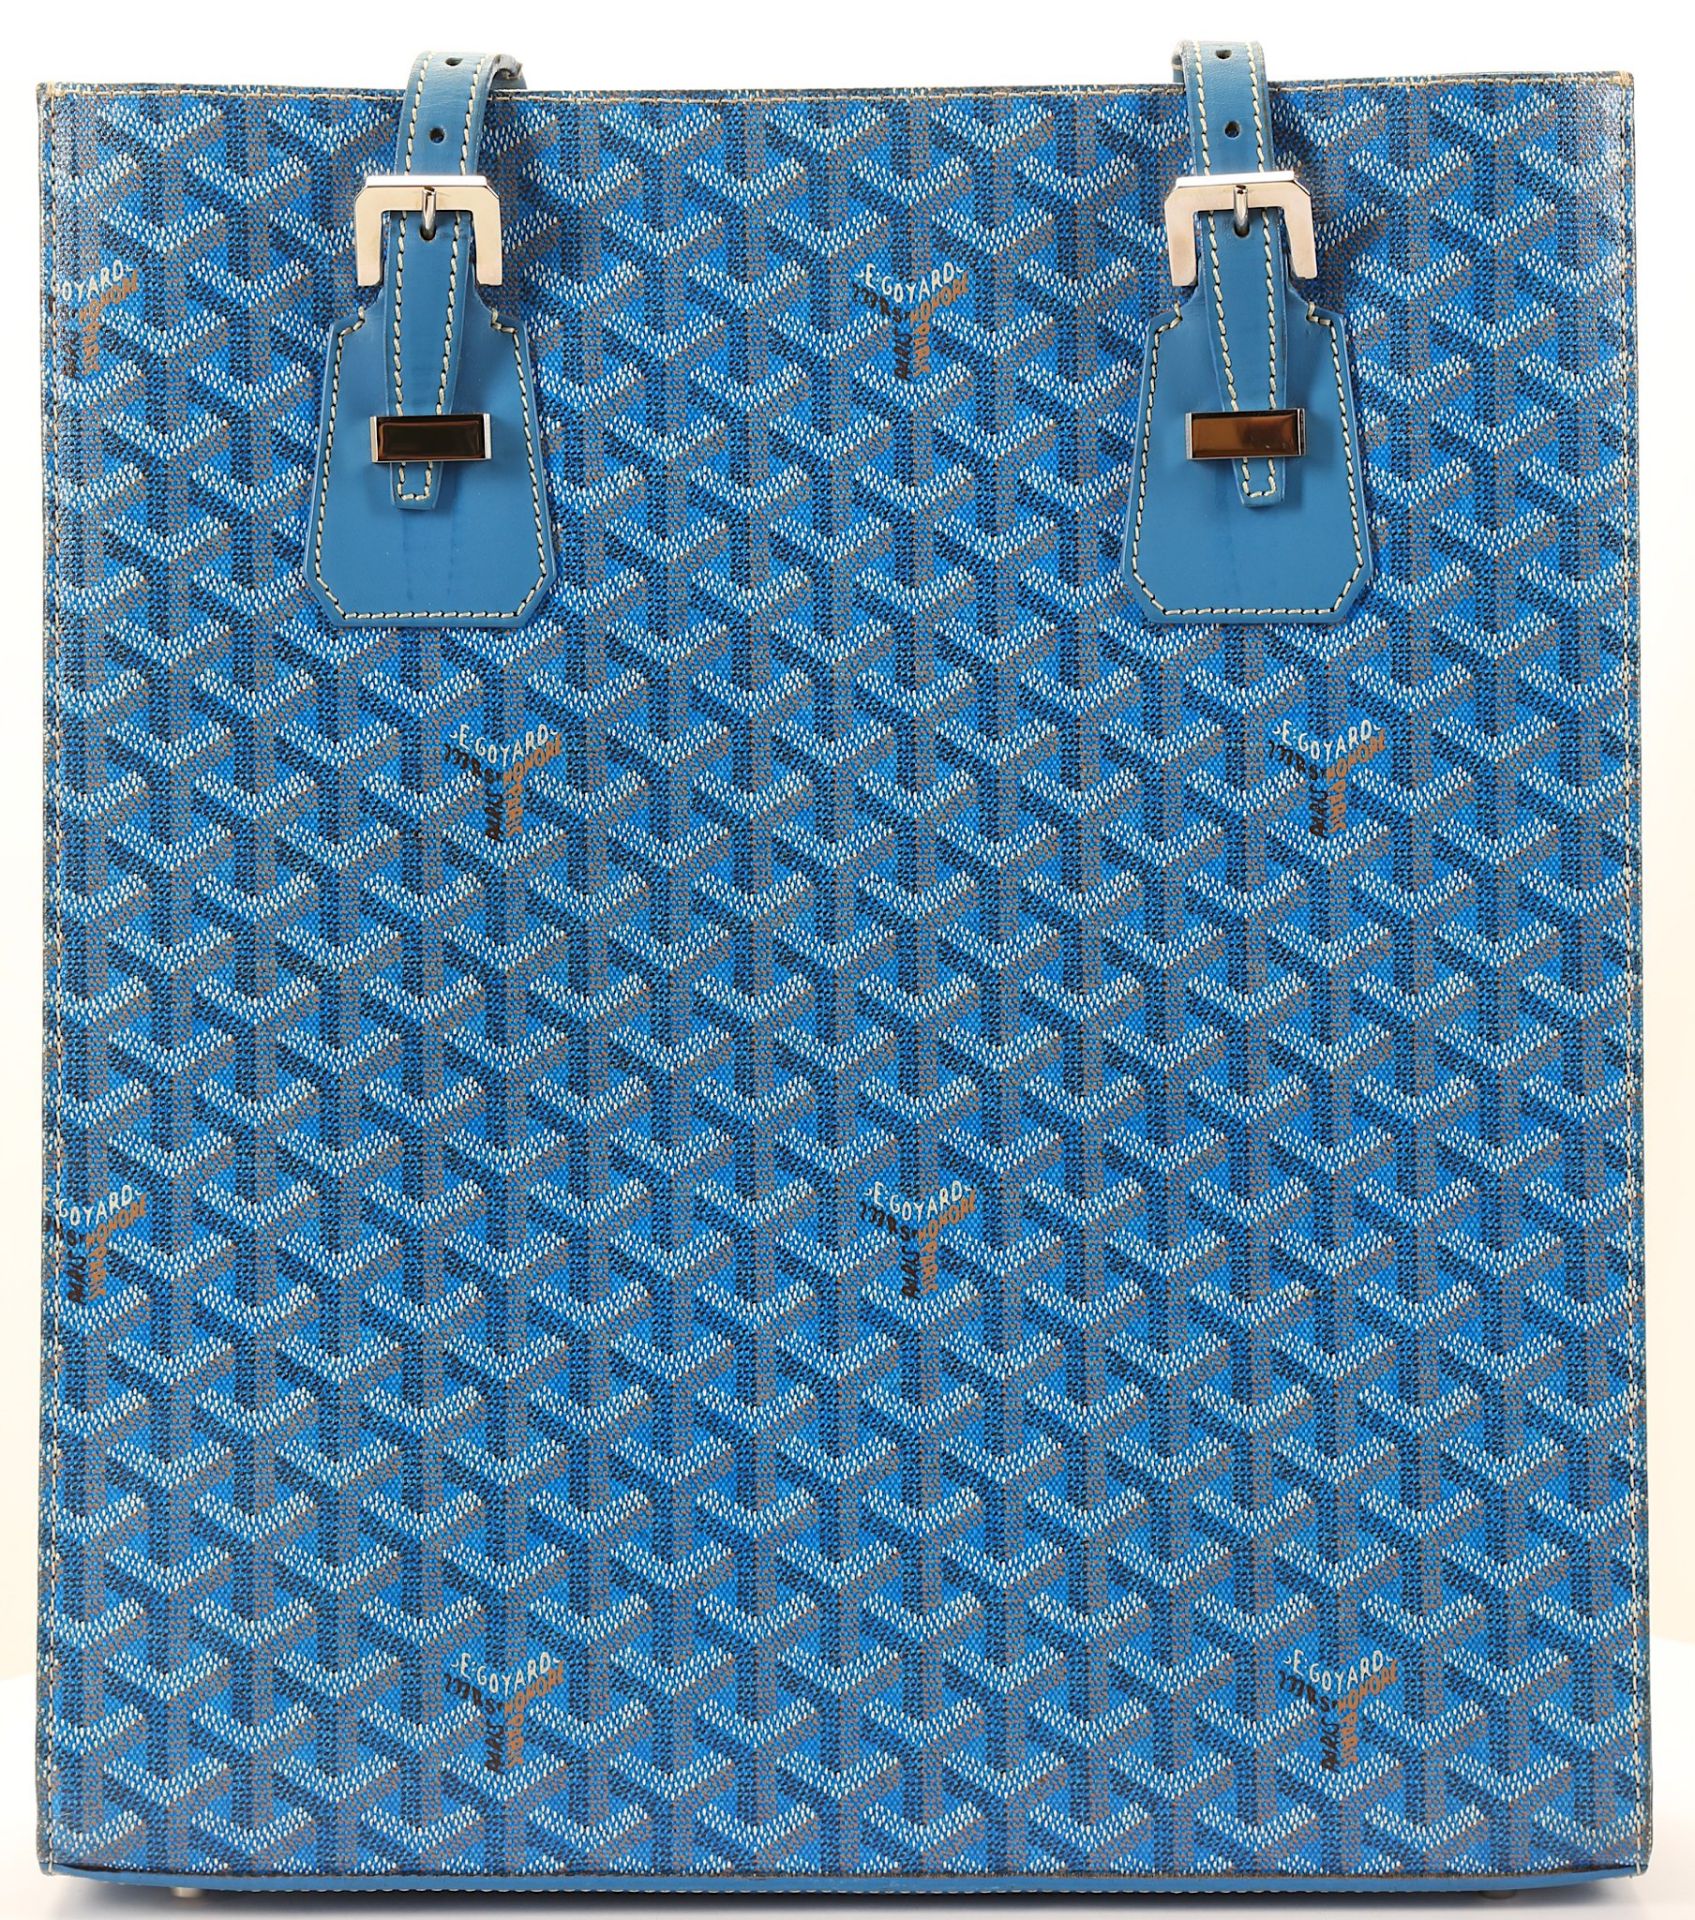 Goyard Blue Comores Tote Bag, hand painted coated - Image 3 of 5